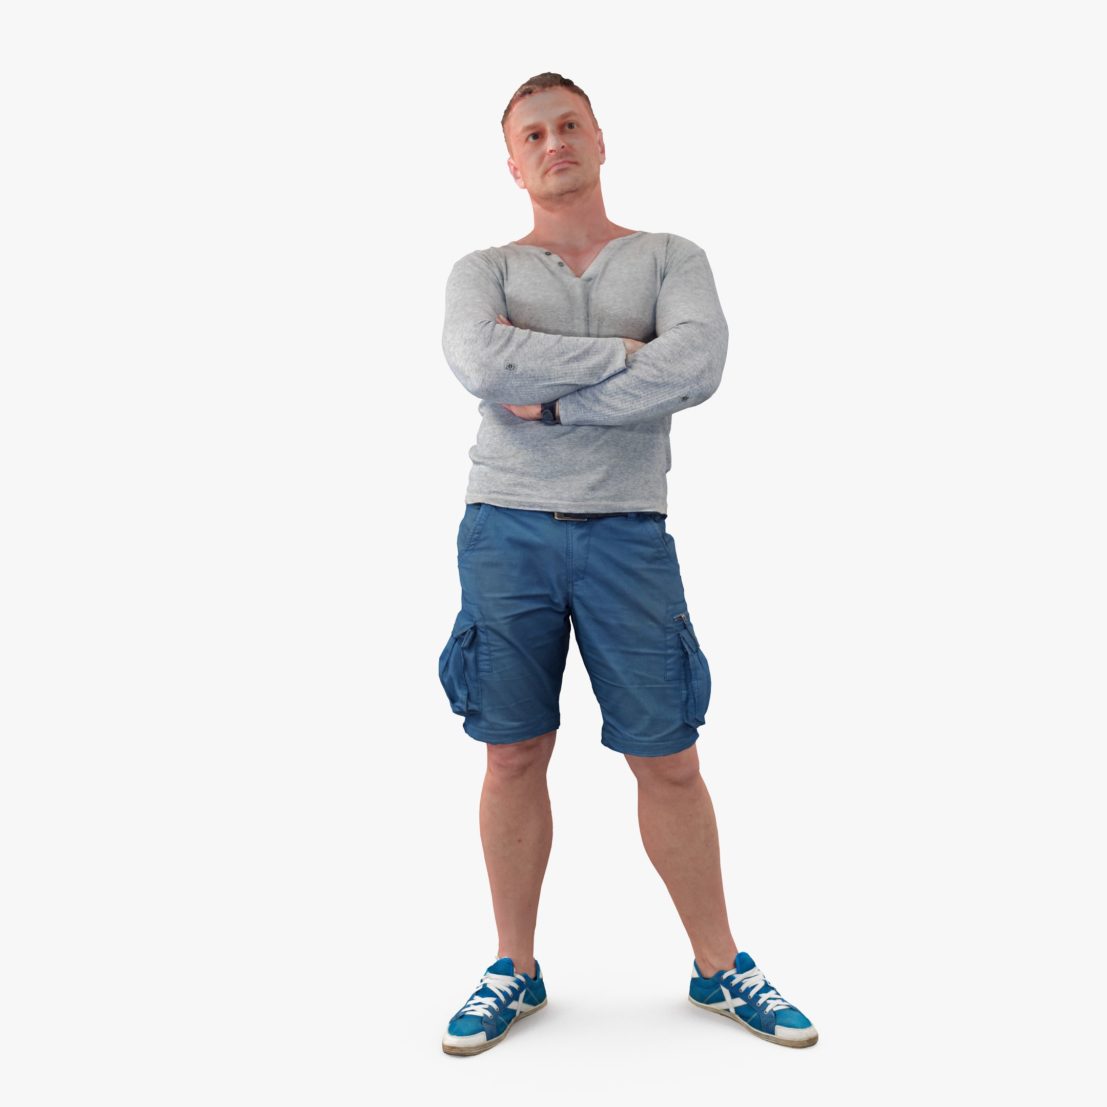 Casual Athletic Male 3D Model | 3DTree Scanning Studio